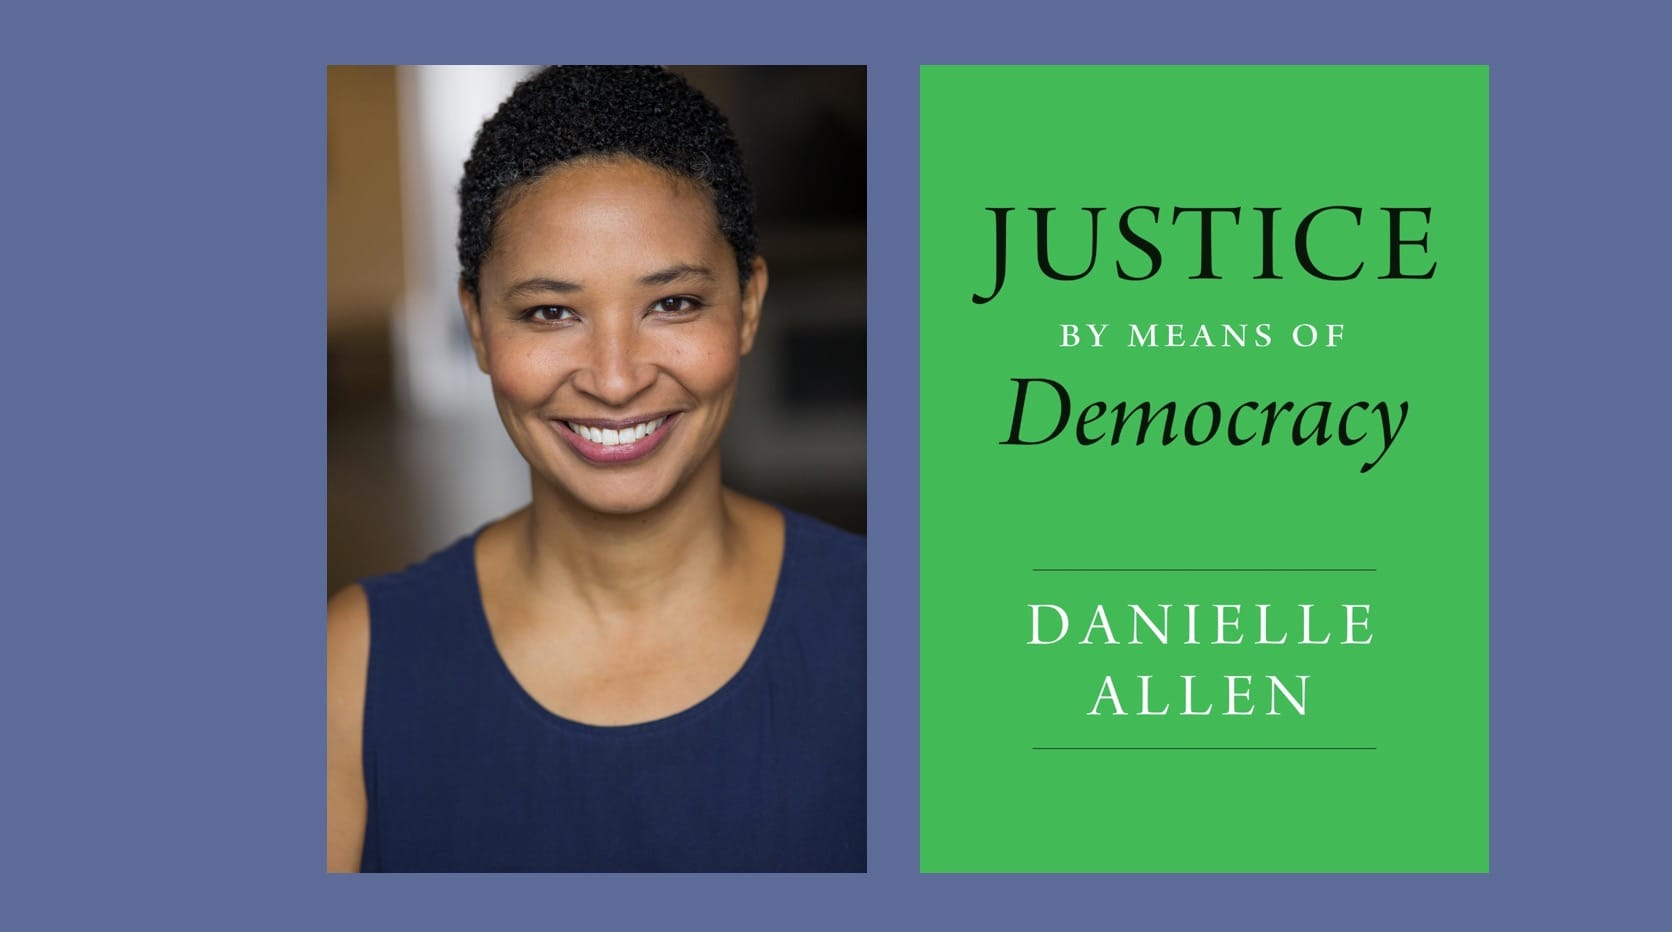 Harvard University professor and acclaimed author Danielle Allen, Ph.D., will present the Humanities and Hoban Lecture, “Who are We as a Nation? Educating for Democracy” at The University of Scranton on Thursday, Nov. 16. The lecture is the final event of the University’s two-year Scranton’s Story, Our Nation’s Story project.